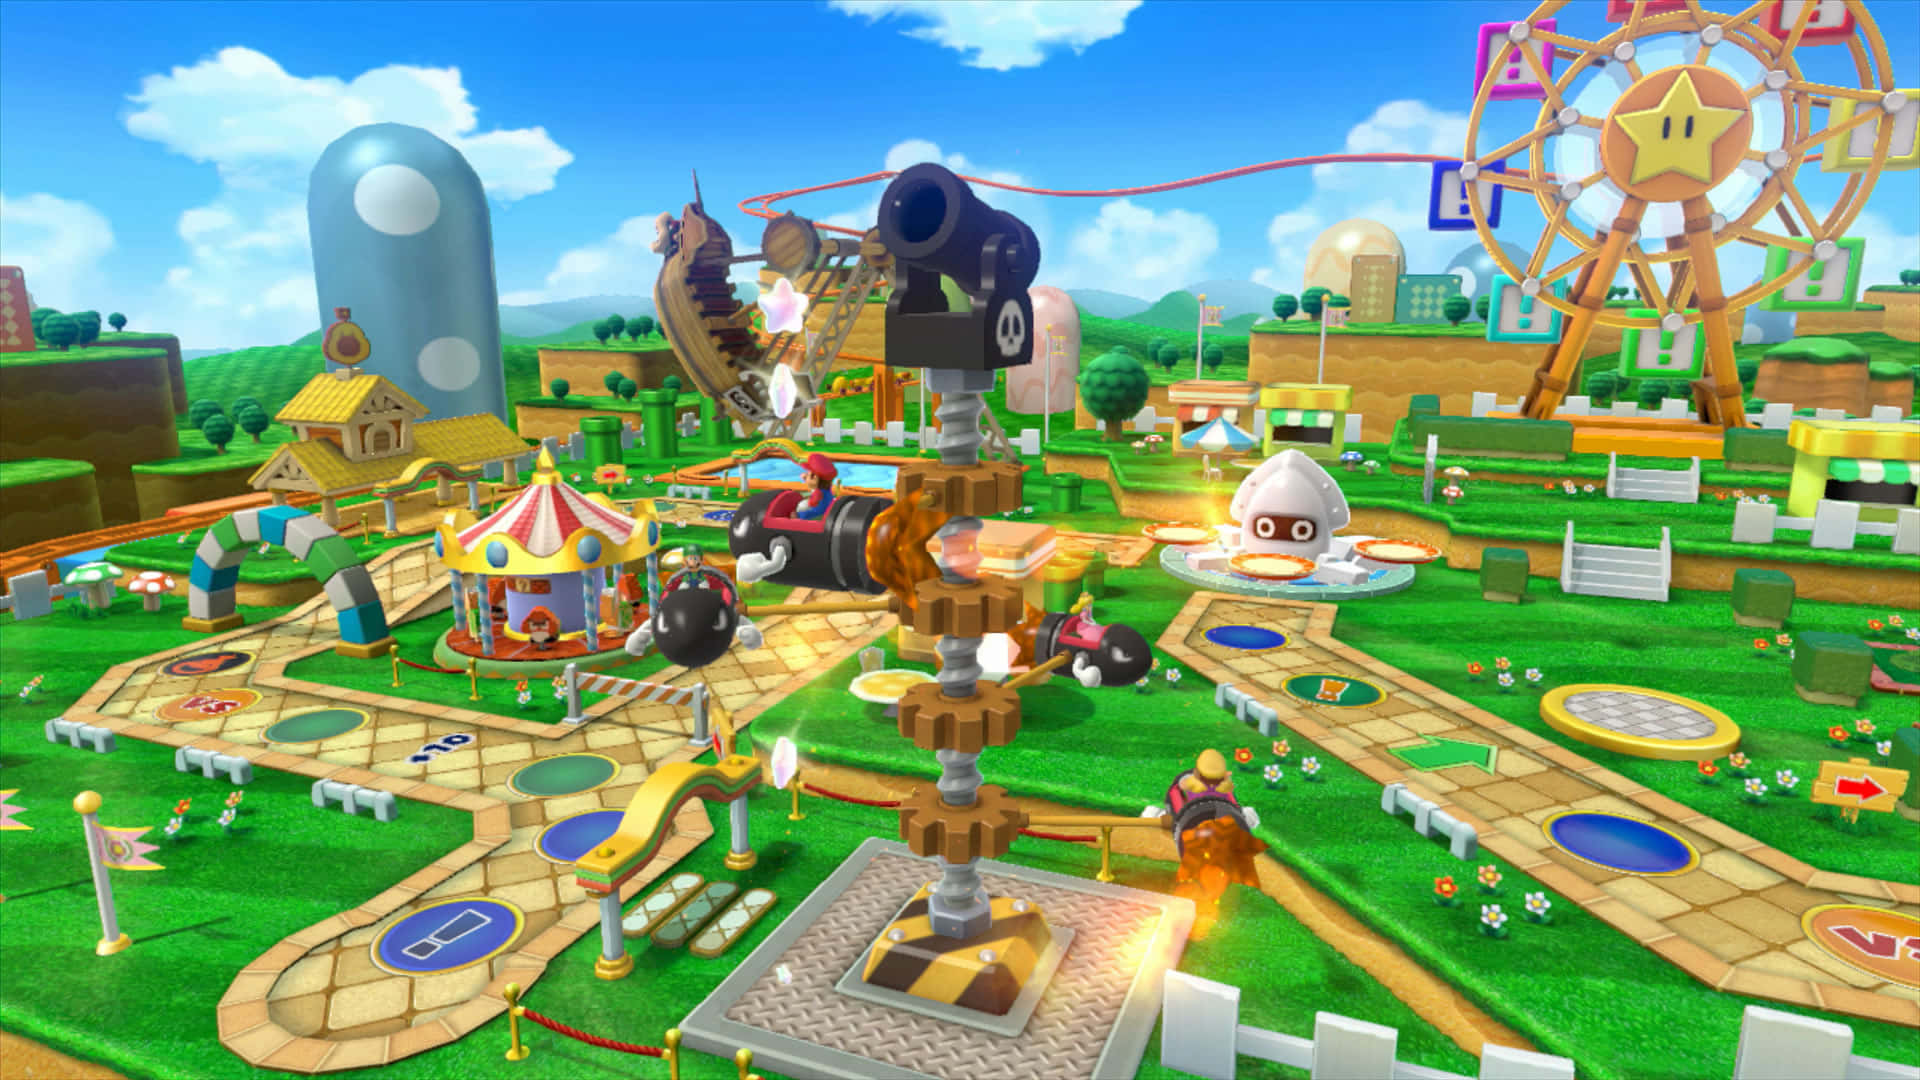 Exciting Mario Party Gameplay on a Colorful Board Wallpaper